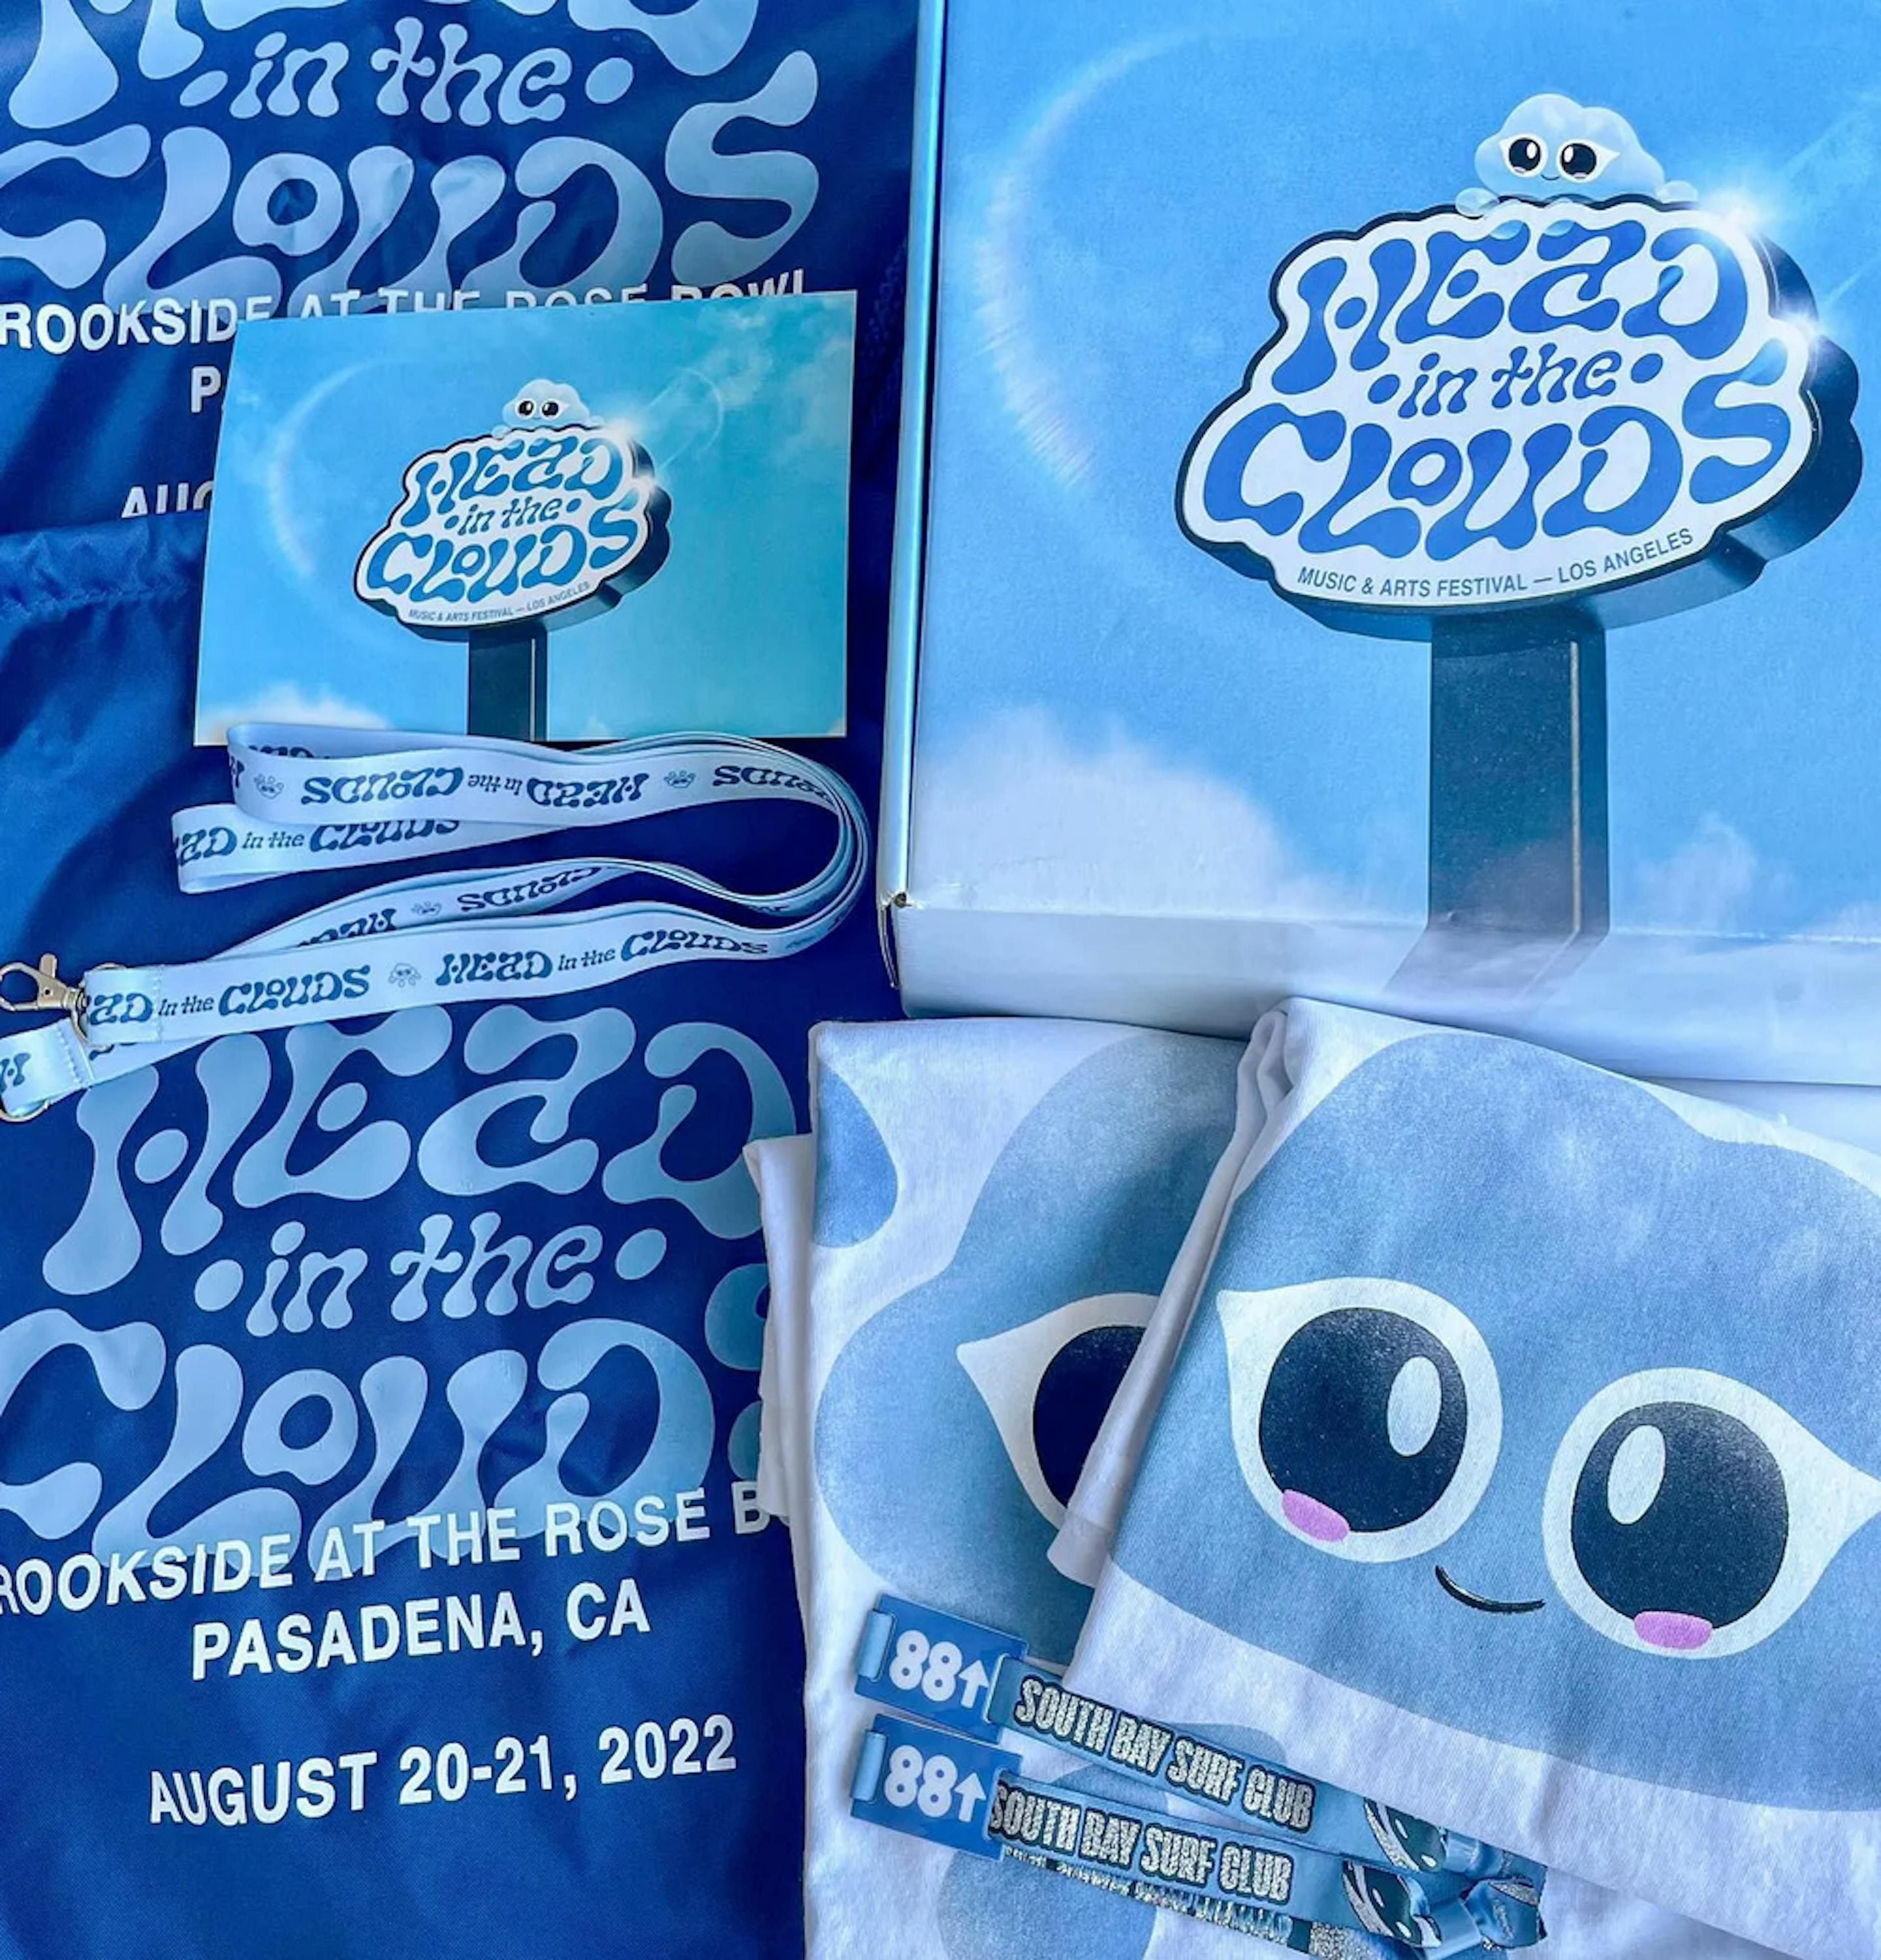 A collection of Head In The Clouds festival merchandise laid out on a blue background. Items include a light blue tote bag featuring Clo The Cloud God's face, a festival lanyard, a small square paper with the event's logo, and a folded blue t-shirt with the same branding. Each item carries the playful and friendly character of the festival's mascot and the cool blue tones of the event's aesthetic. 'Head in the Clouds' and the date of the festival, 'August 20-21, 2022', are prominently displayed, highlighting the event's details.